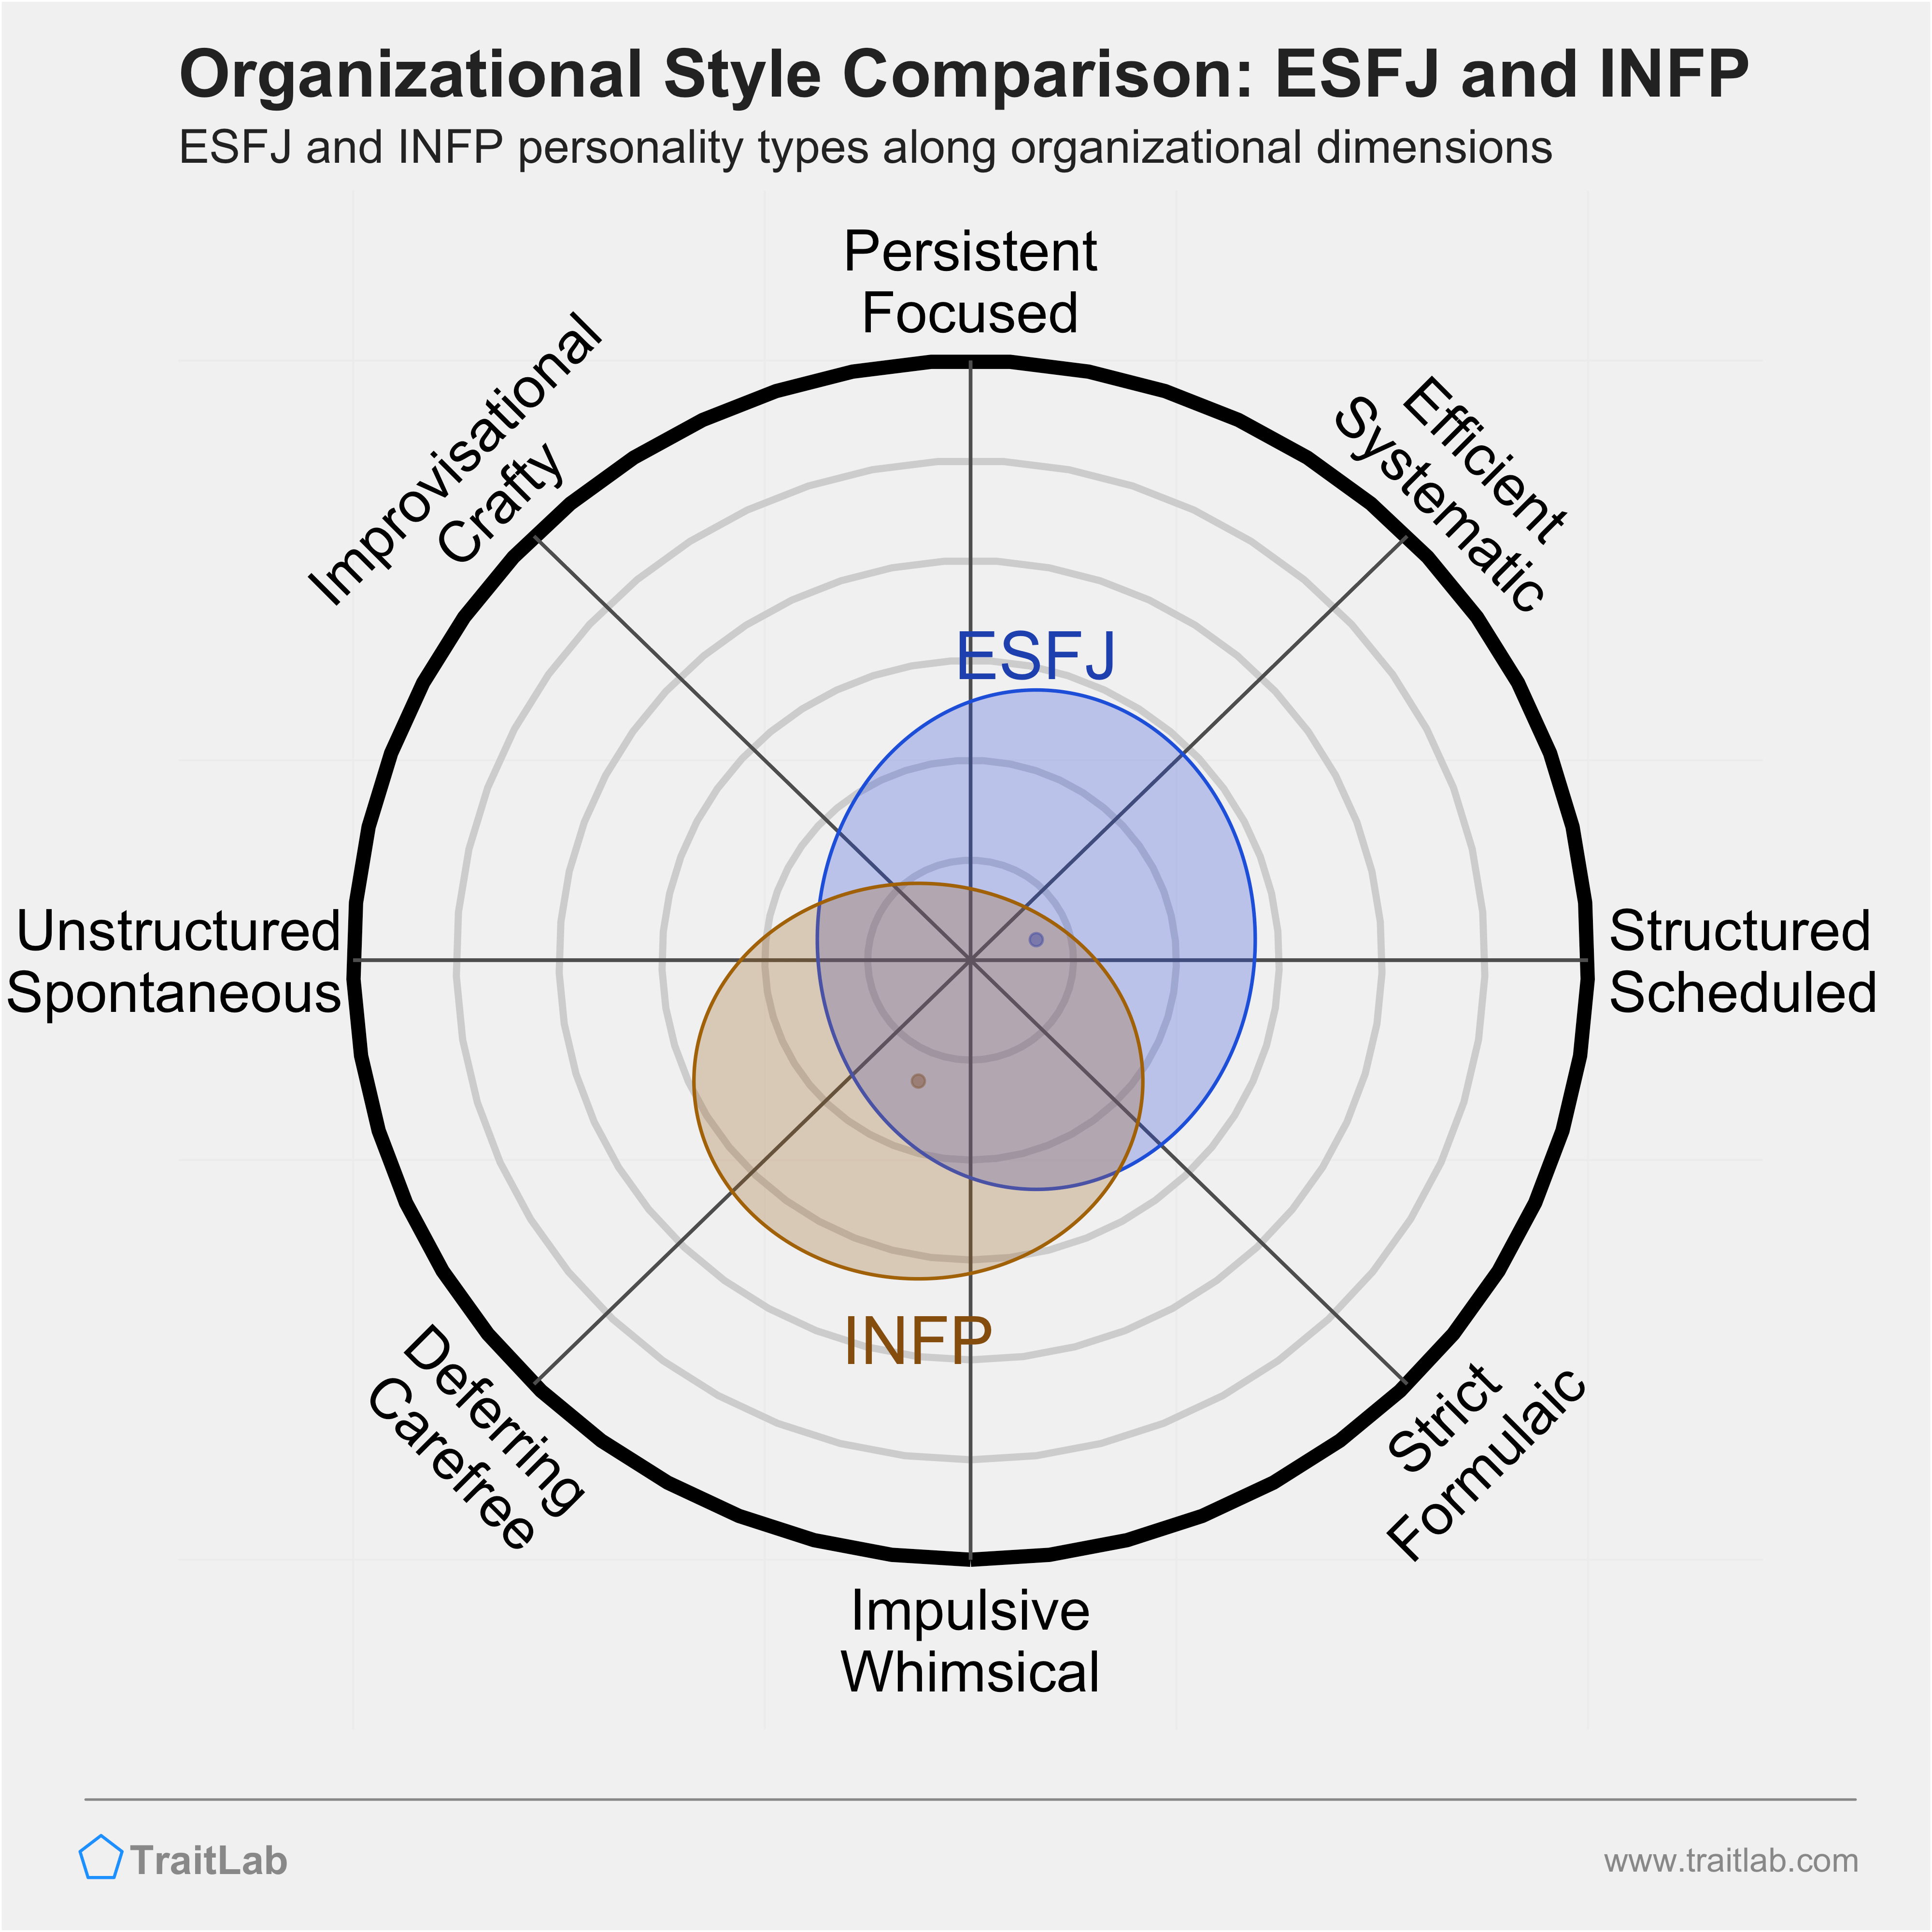 ESFJ and INFP comparison across organizational dimensions